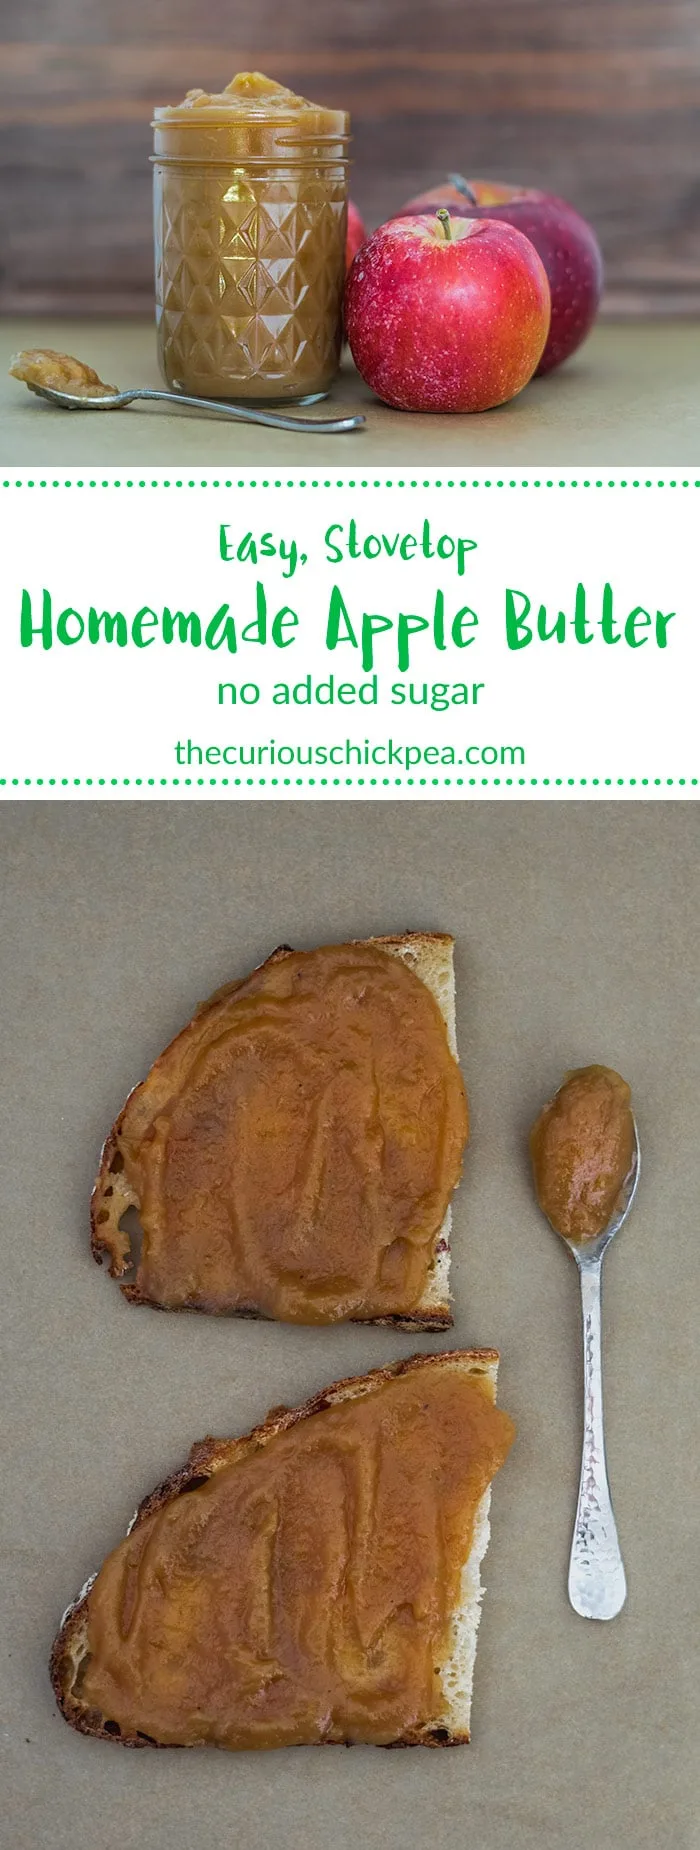 Easy Stovetop Apple Butter | This apple butter is perfectly sweet and tart with no added sugar. It cooks slowly on the stove to a buttery texture and is bursting with apple flavor. | thecuriouschickpea #vegan #apples #dessert